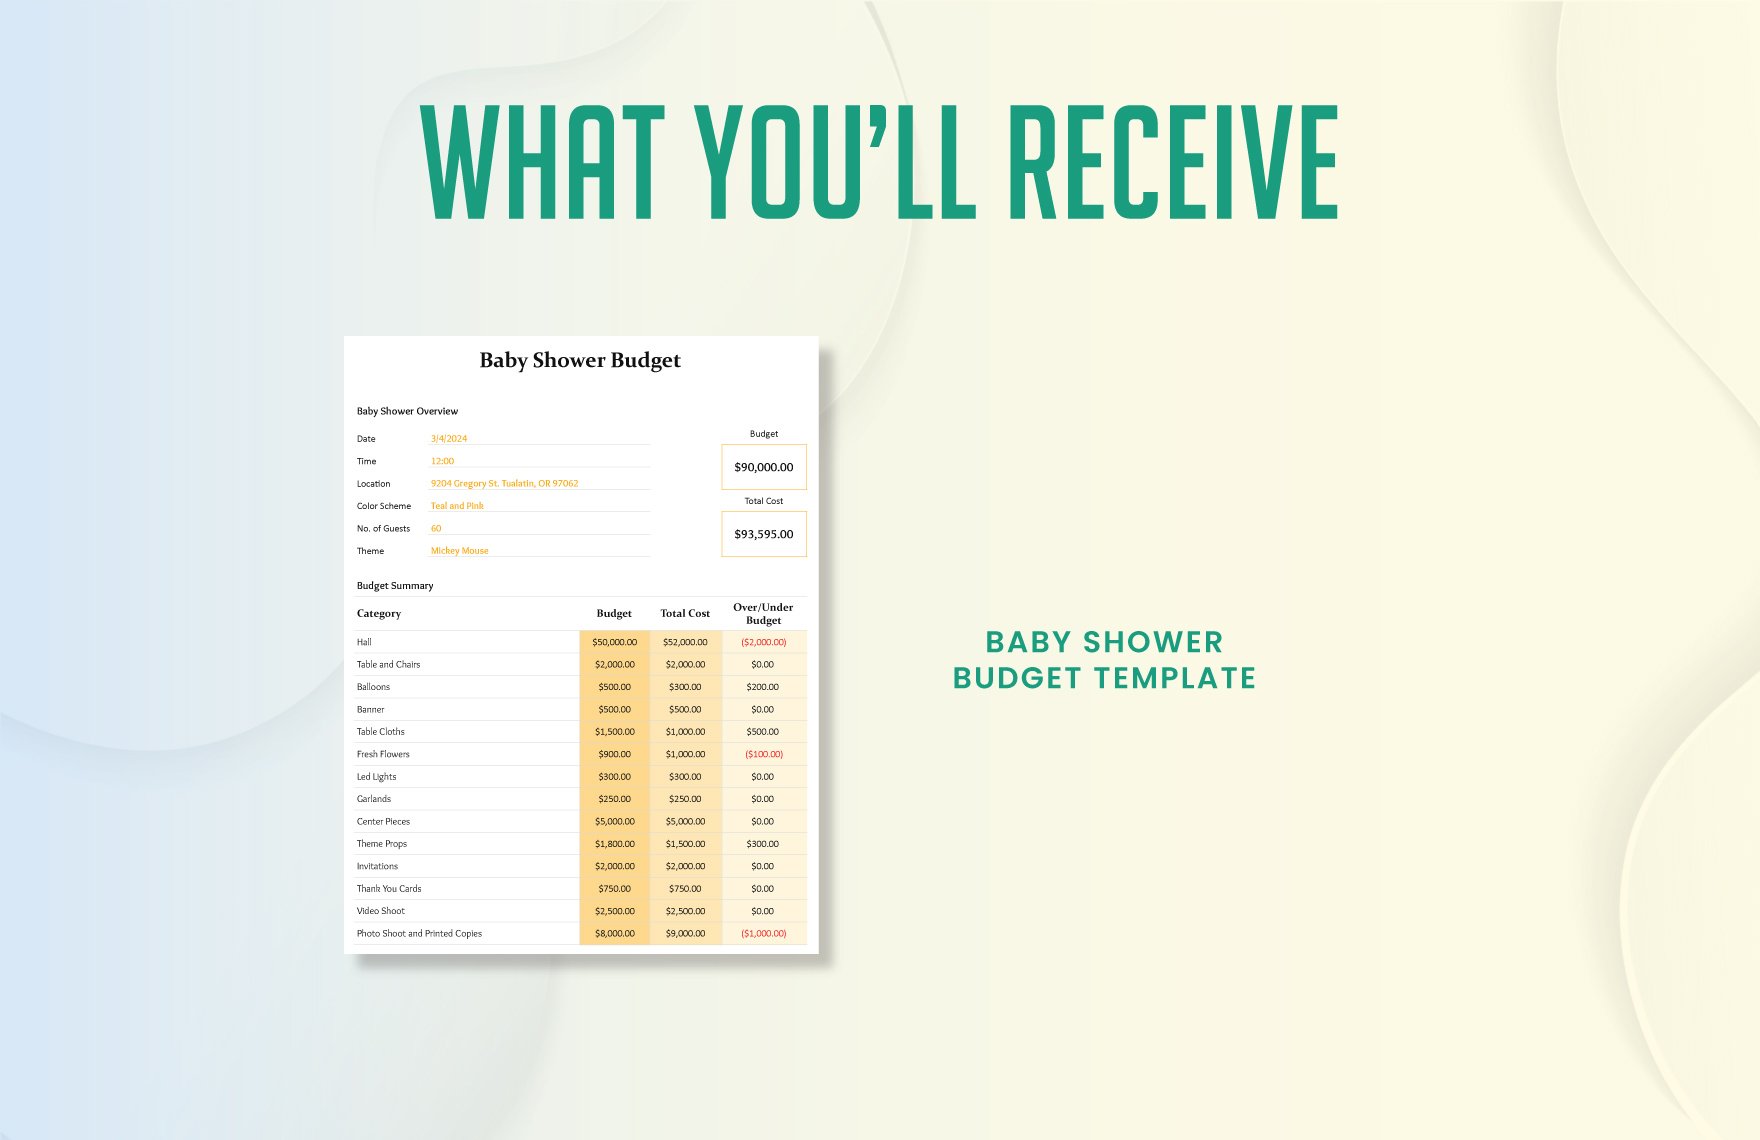 Baby Shower Budget Template